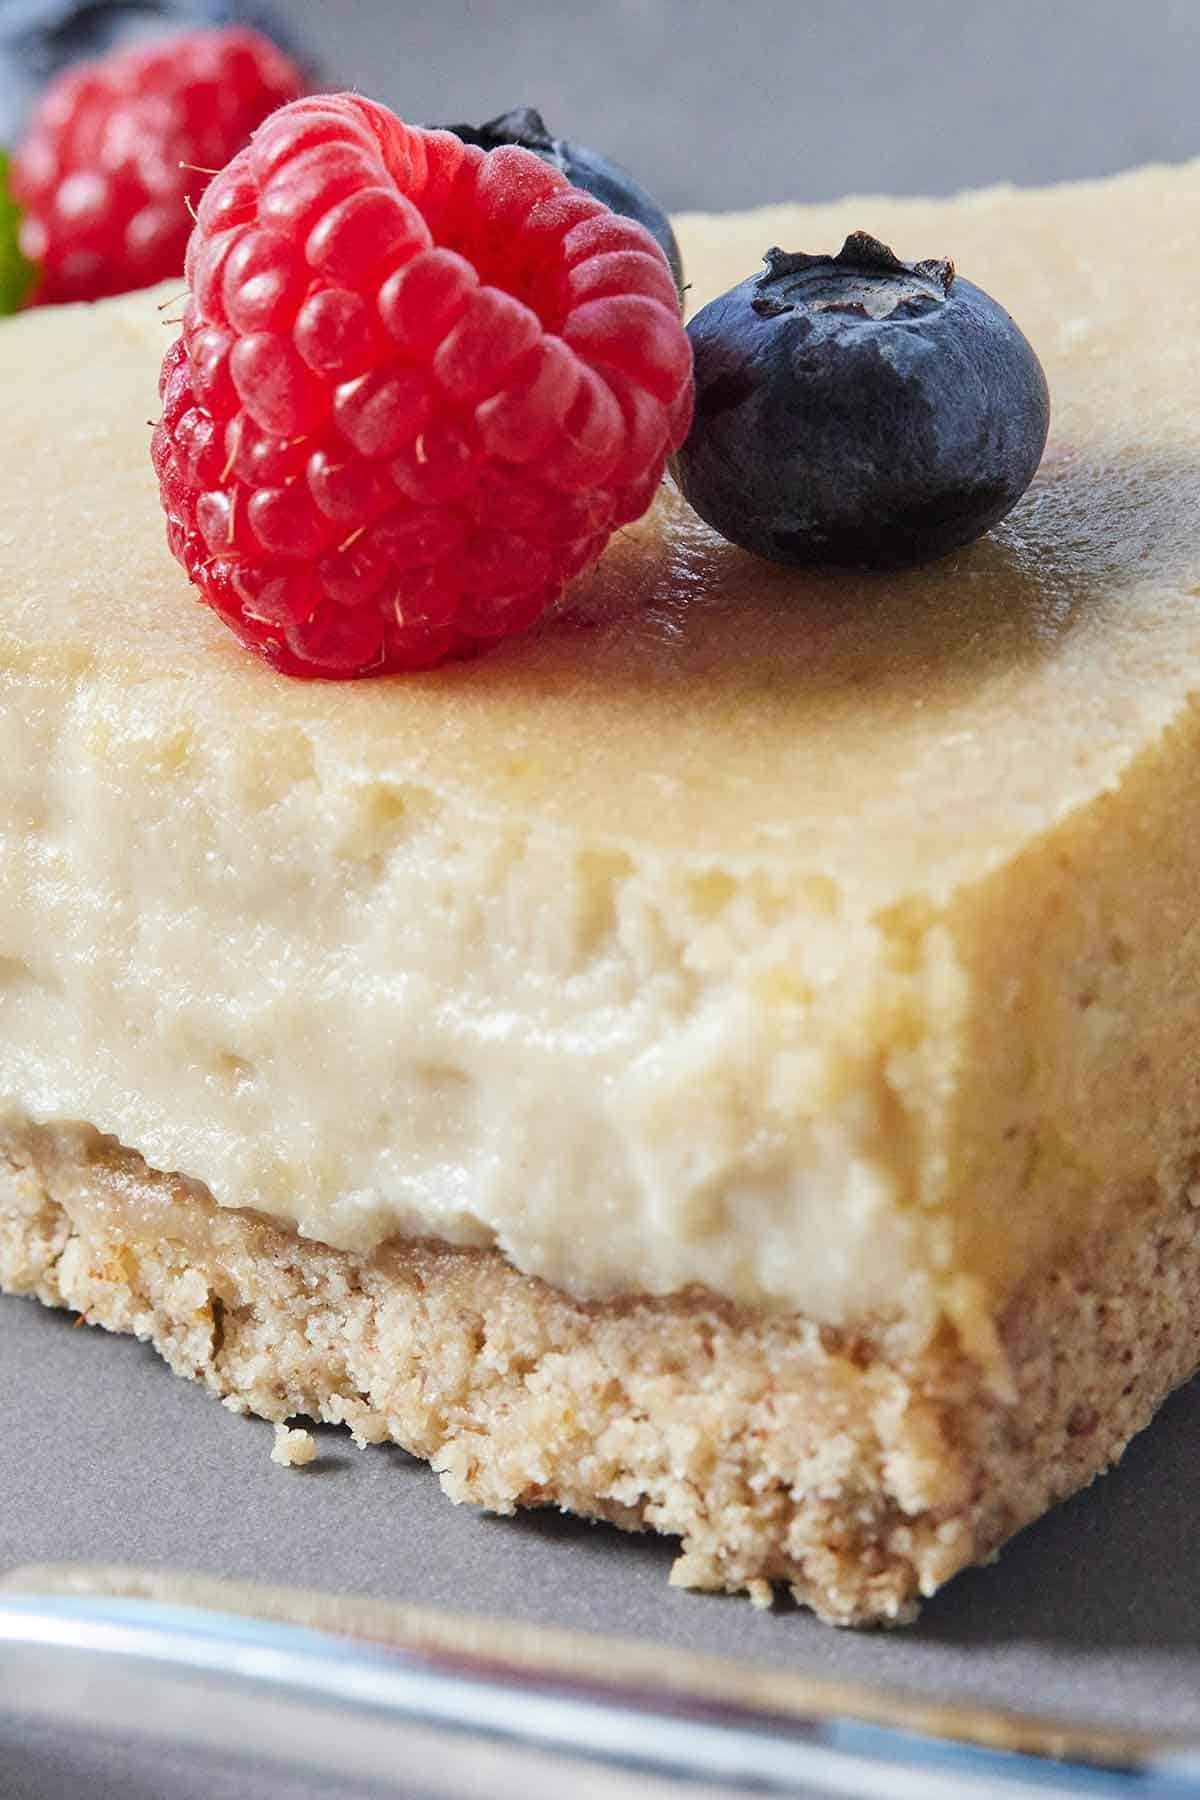 Close up photo of a slice of vegan cheesecake, showing the crust and filling, with a raspberry and blueberry on top.